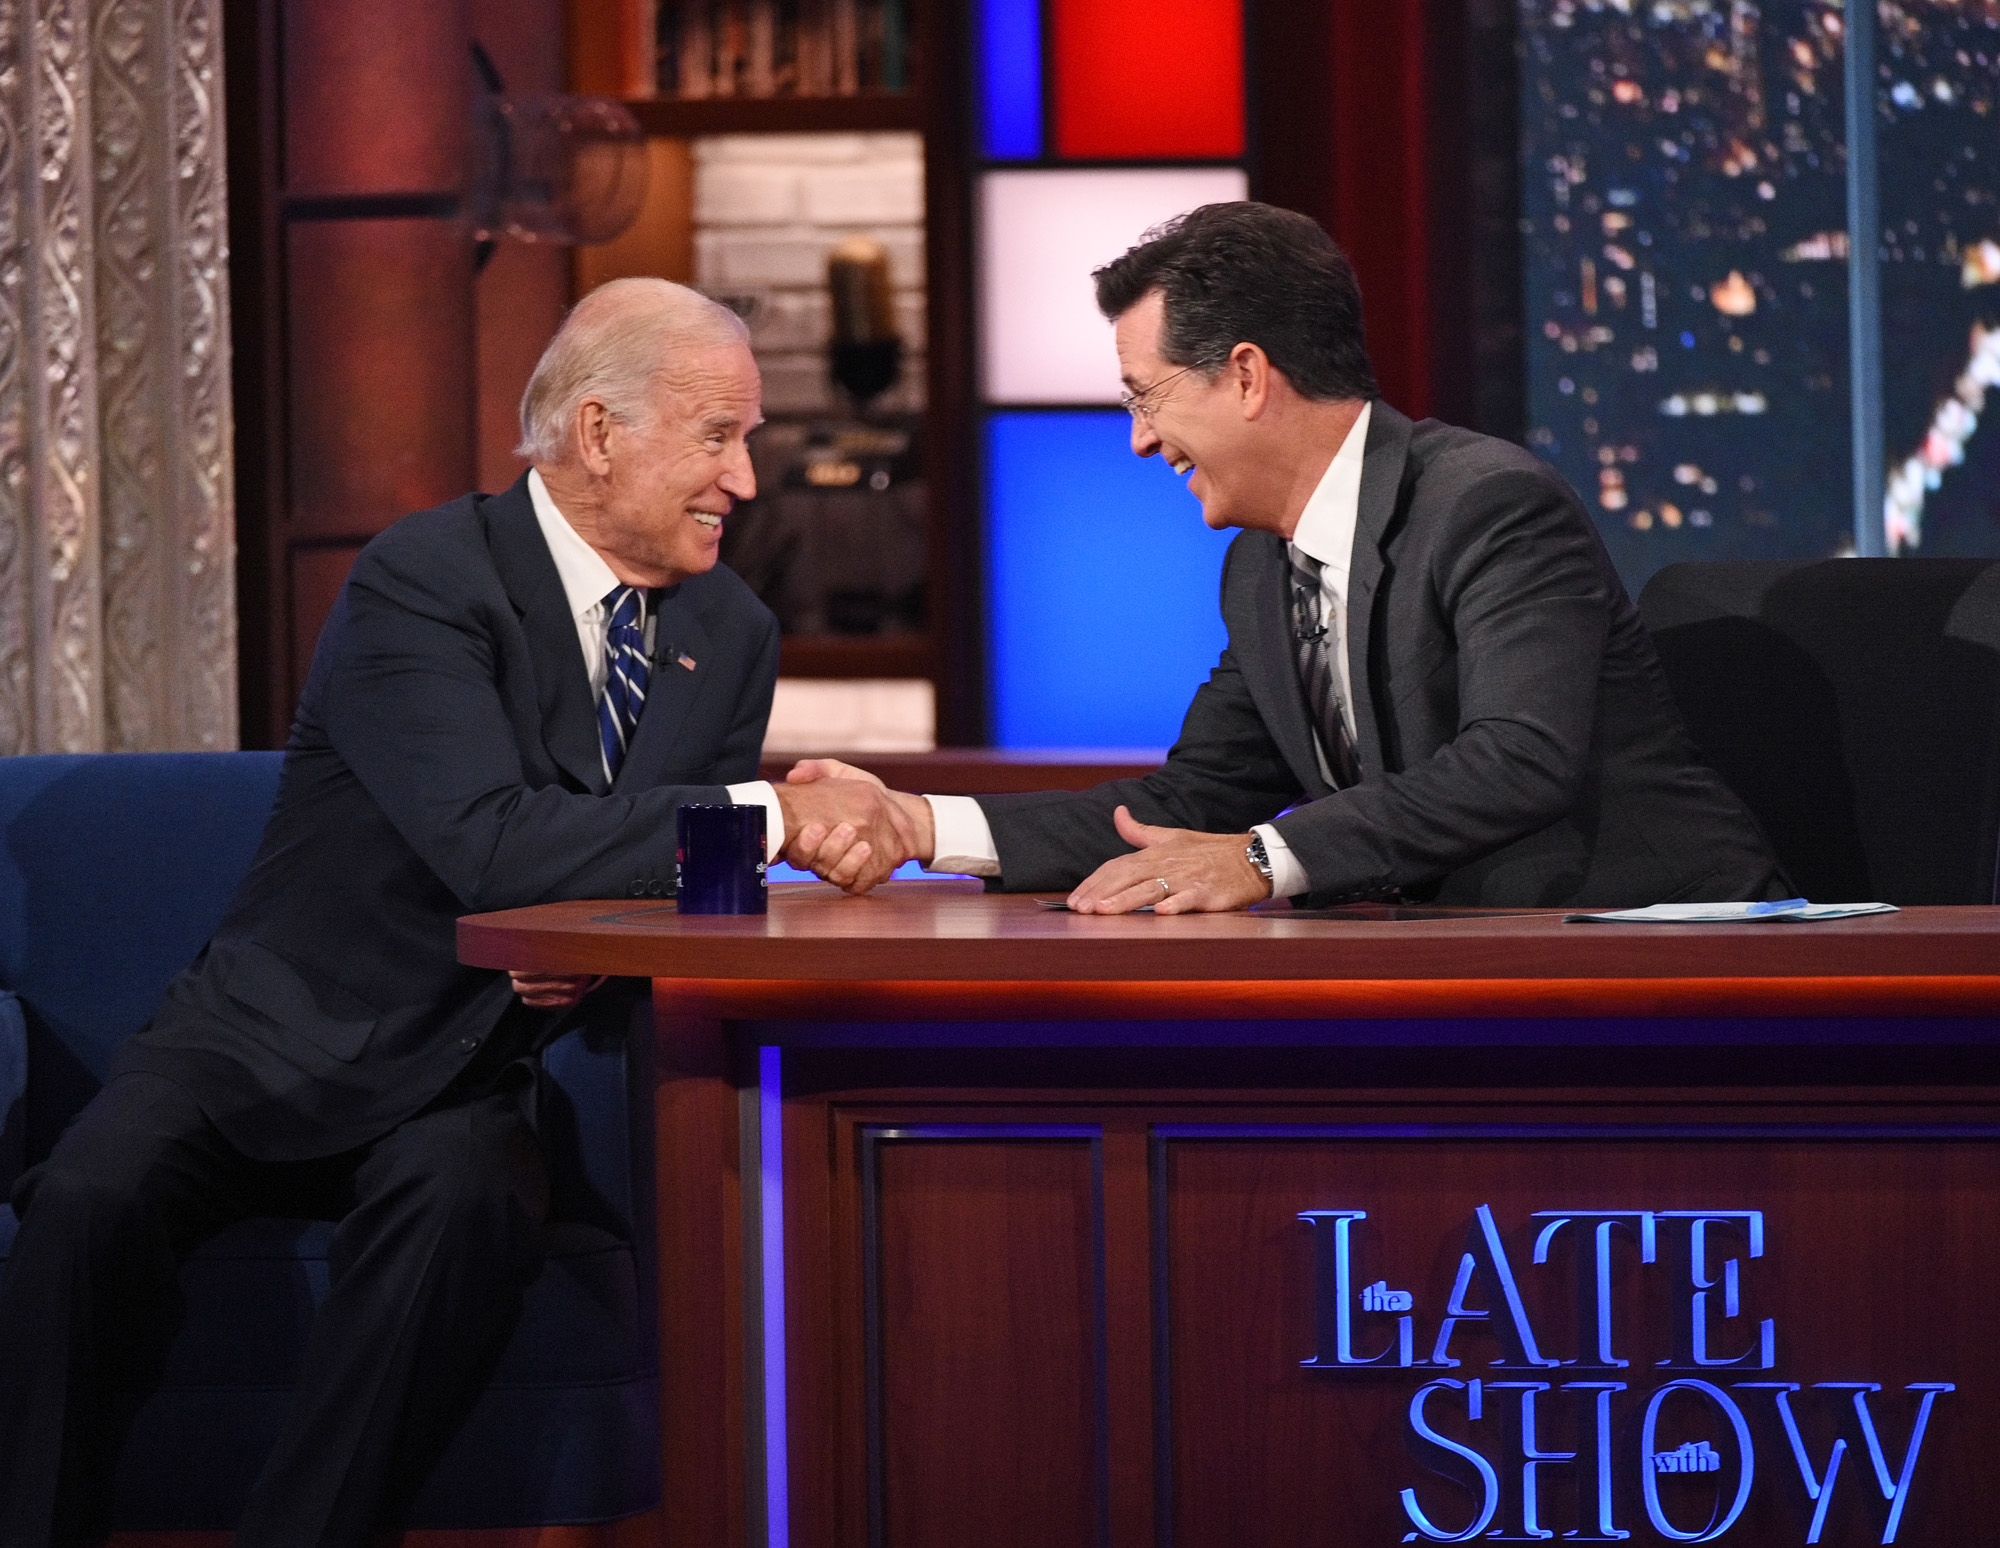 Stephen Colbert talks with Vice President Joe Biden, on The Late Show with Stephen Colbert on Sept 10, 2015.